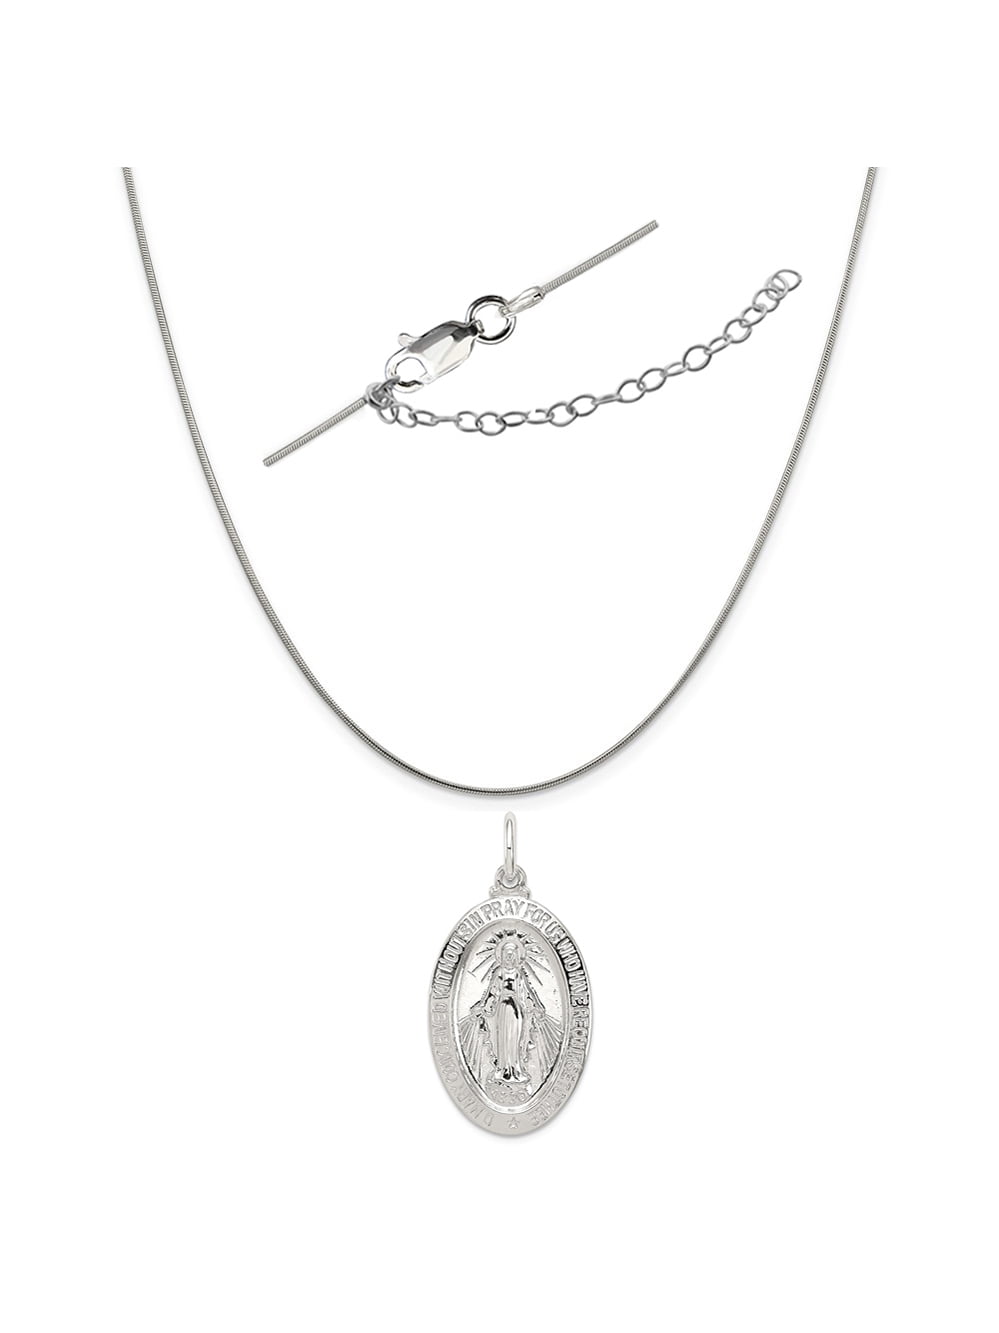 Sterling Silver Rhodium Plated Polished French Horn Charm on a Sterling Silver Cable Snake or Ball Chain Necklace